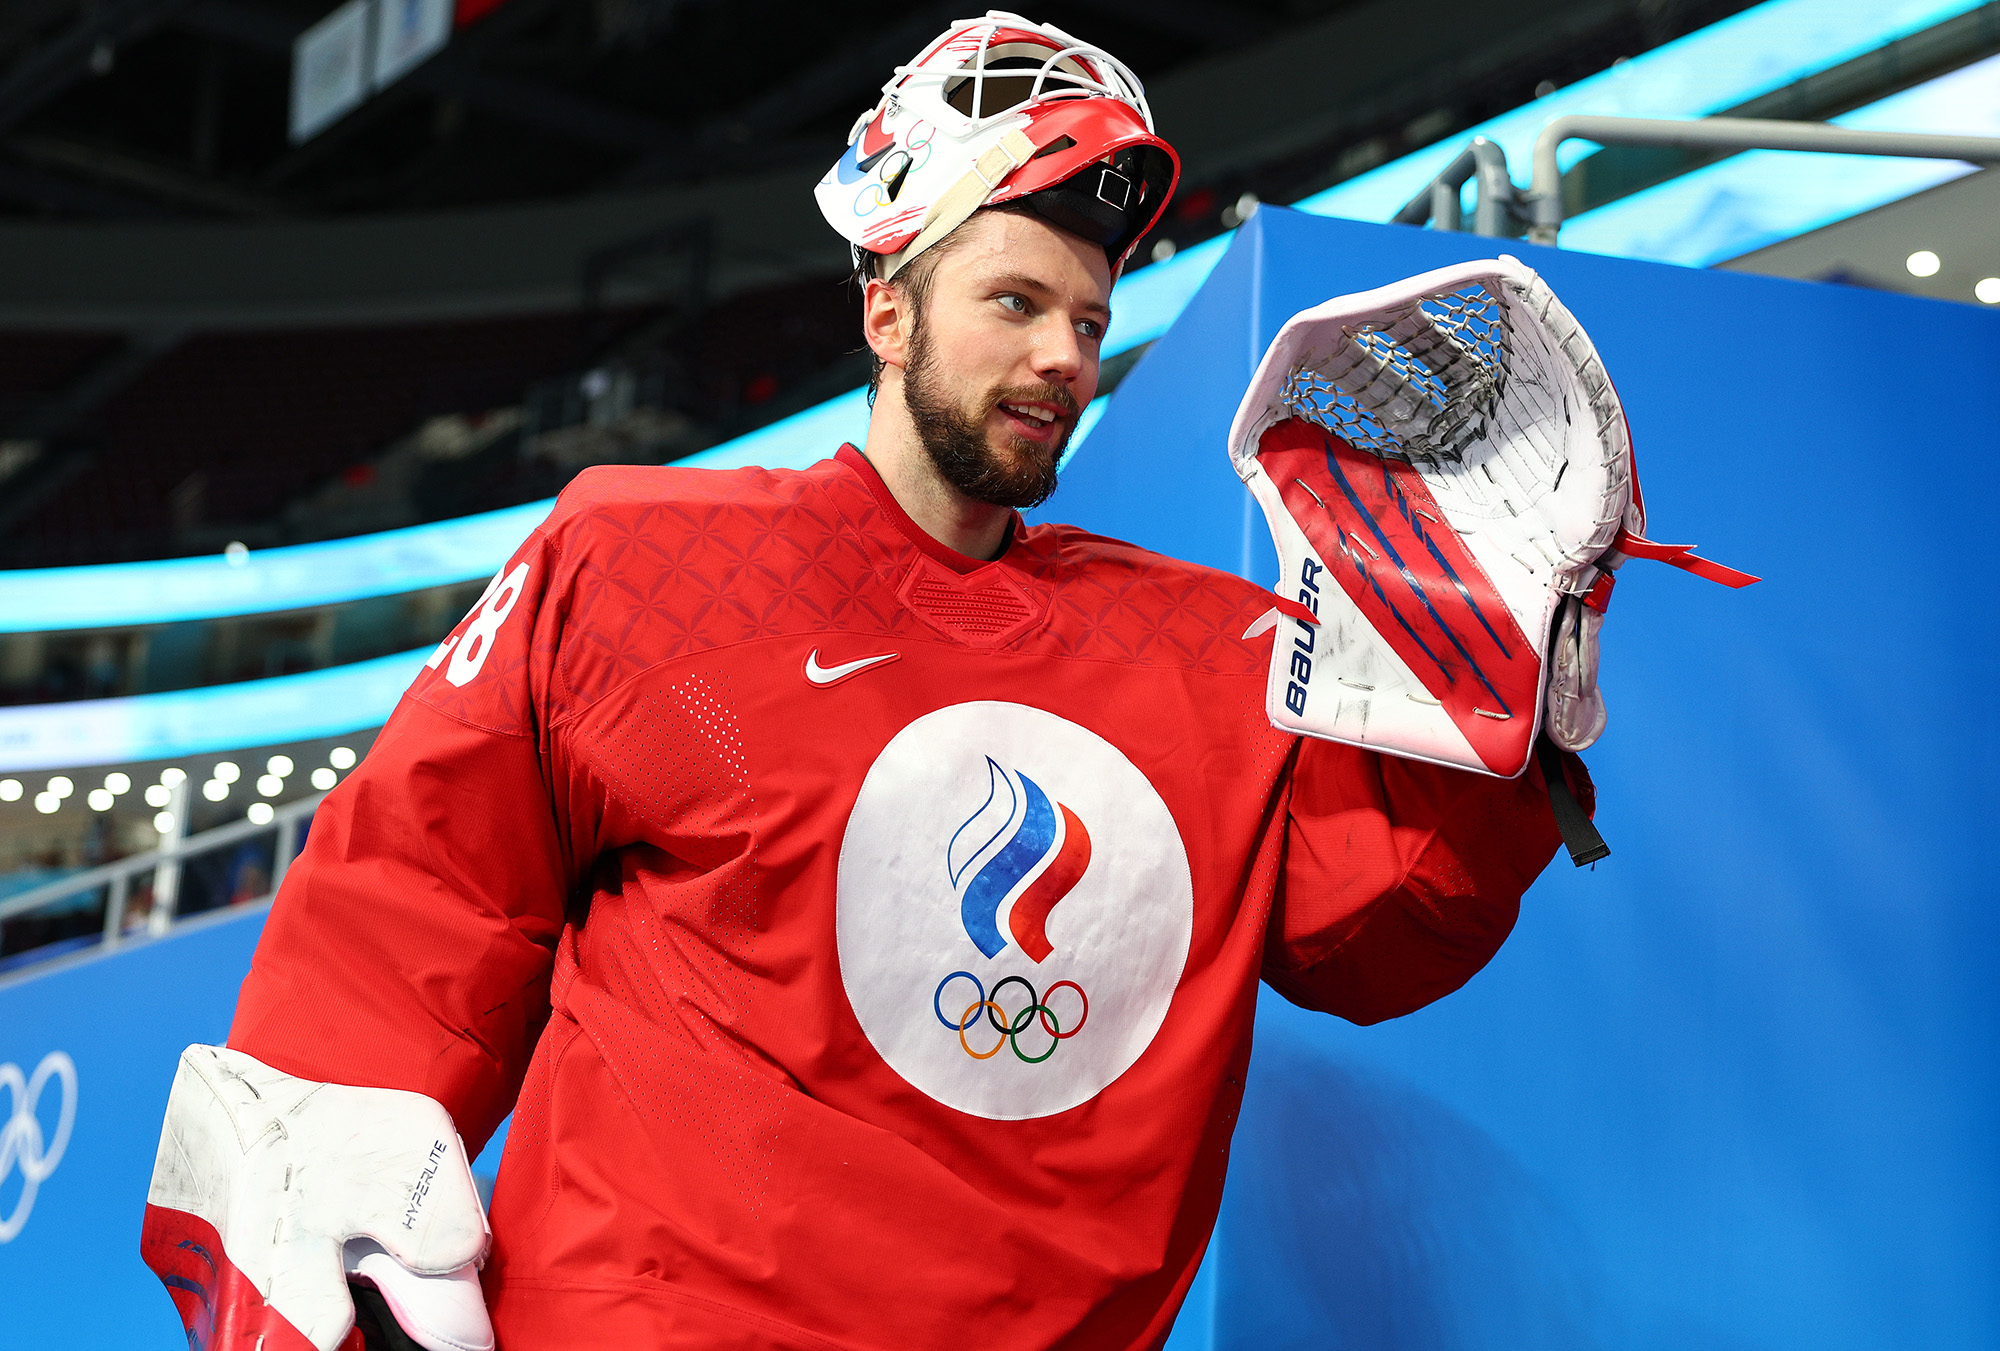 Russian goalkeeper Ivan Fedotov leaves the rink after defeating Team Denmark 3-1 in the men’s ice hockey quarterfinal match between Team ROC and Team Denmark at the Beijing 2022 Winter Olympic Games on February 16, in Beijing, China.